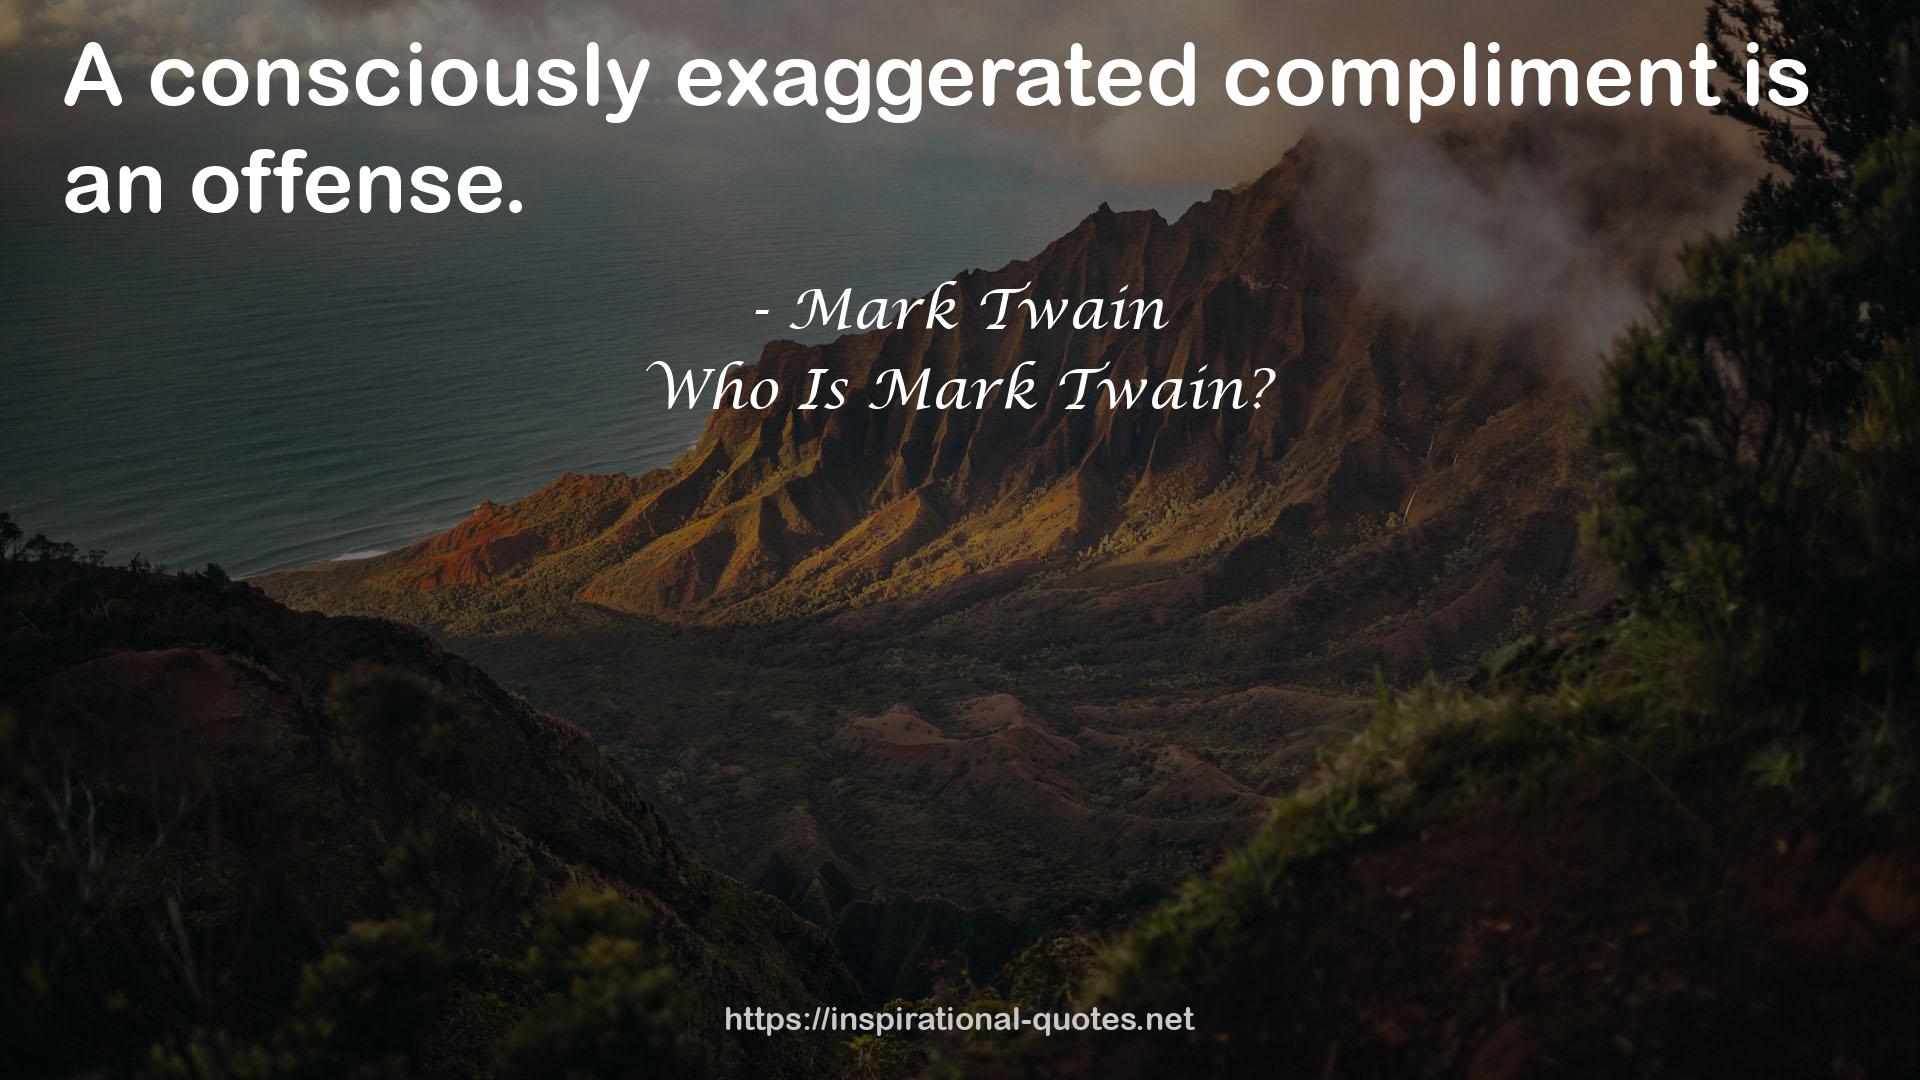 Who Is Mark Twain? QUOTES